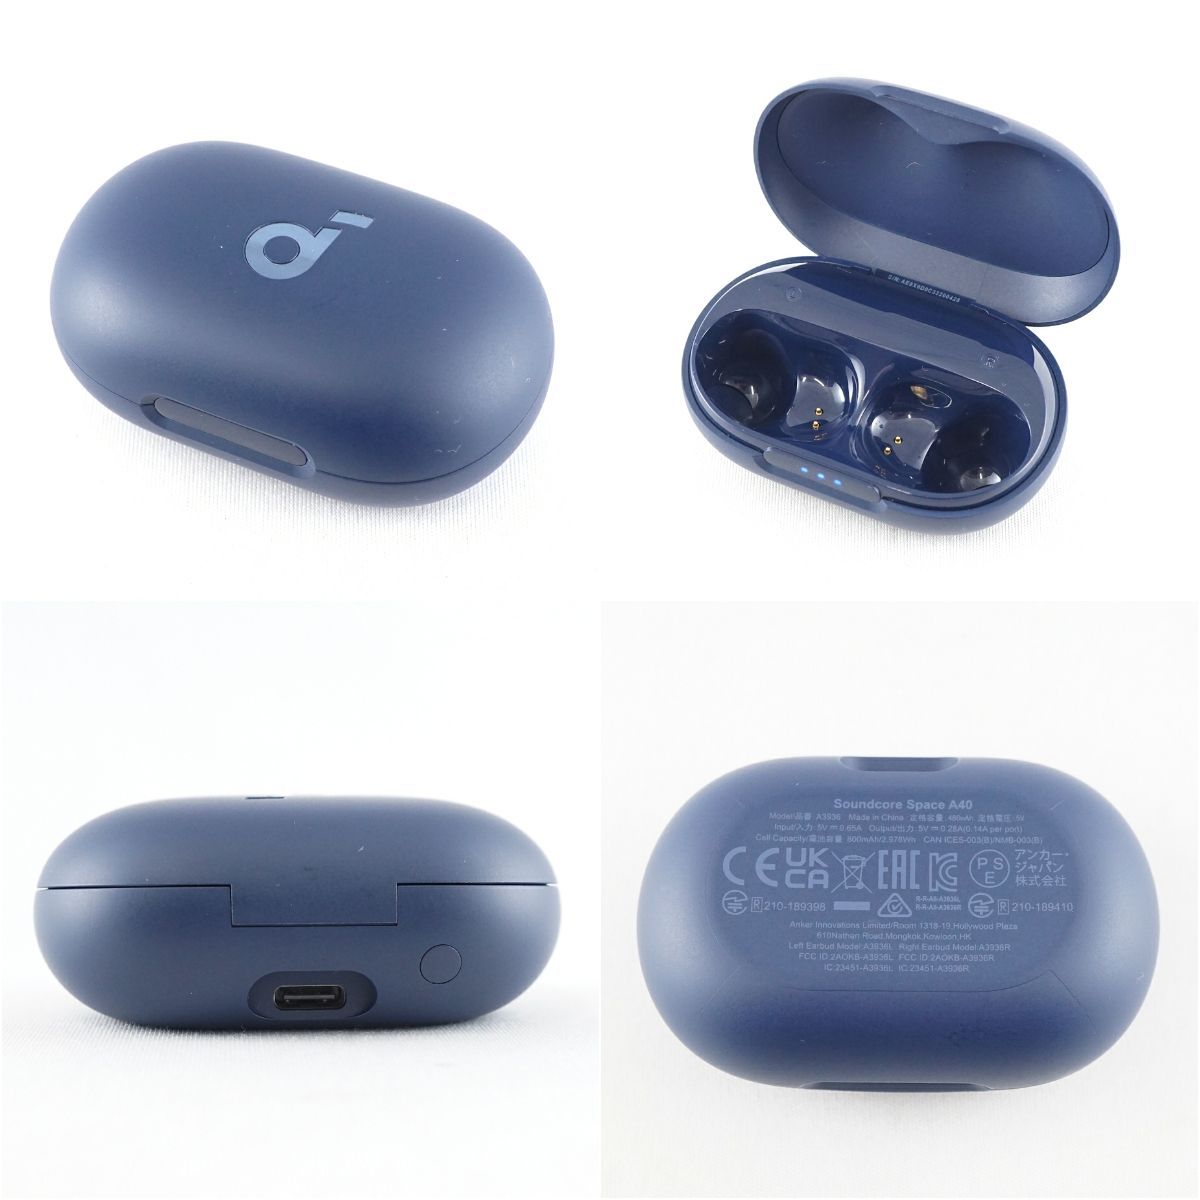 ANKER Soundcore Space A40 完全ワイヤレスイヤホン USED美品 A3936 